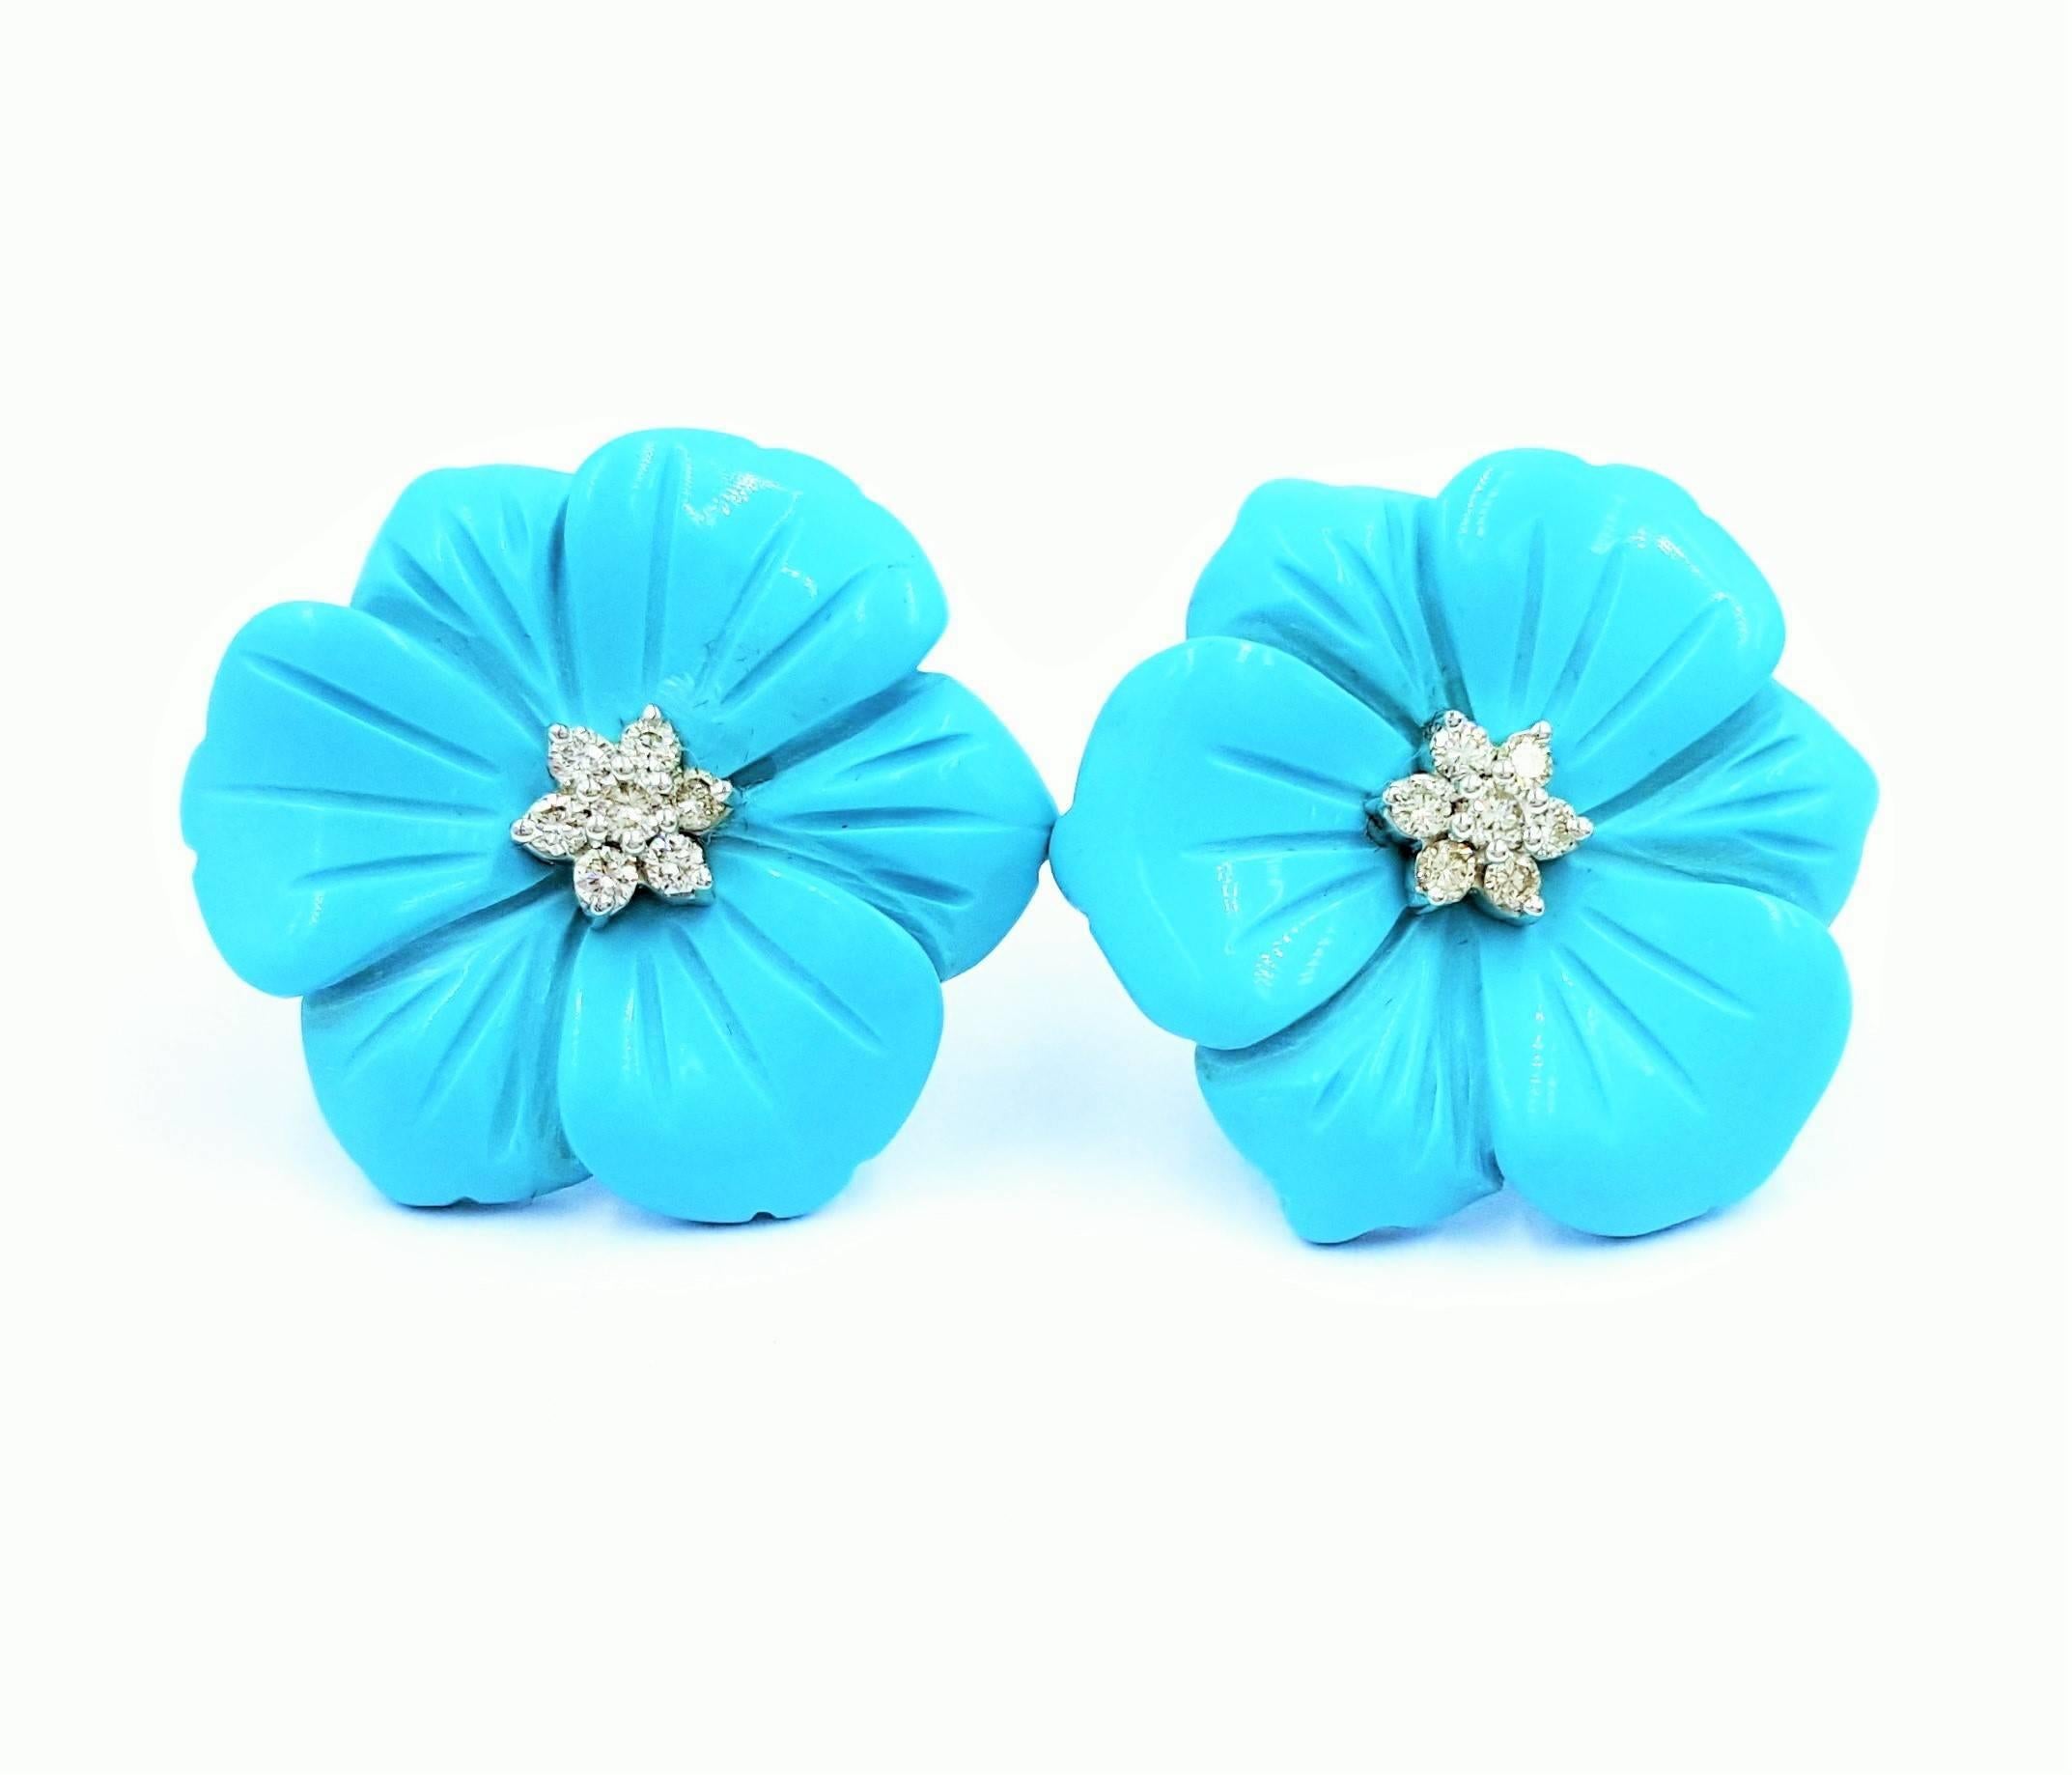 These gorgeous hand carved Persian Turquoise flower motif earrings feature .25 carats of ideal cut round brilliant diamonds in the center set in 14kt white gold bringing life and fire out of these captivating stud style earrings. An exclusive brand